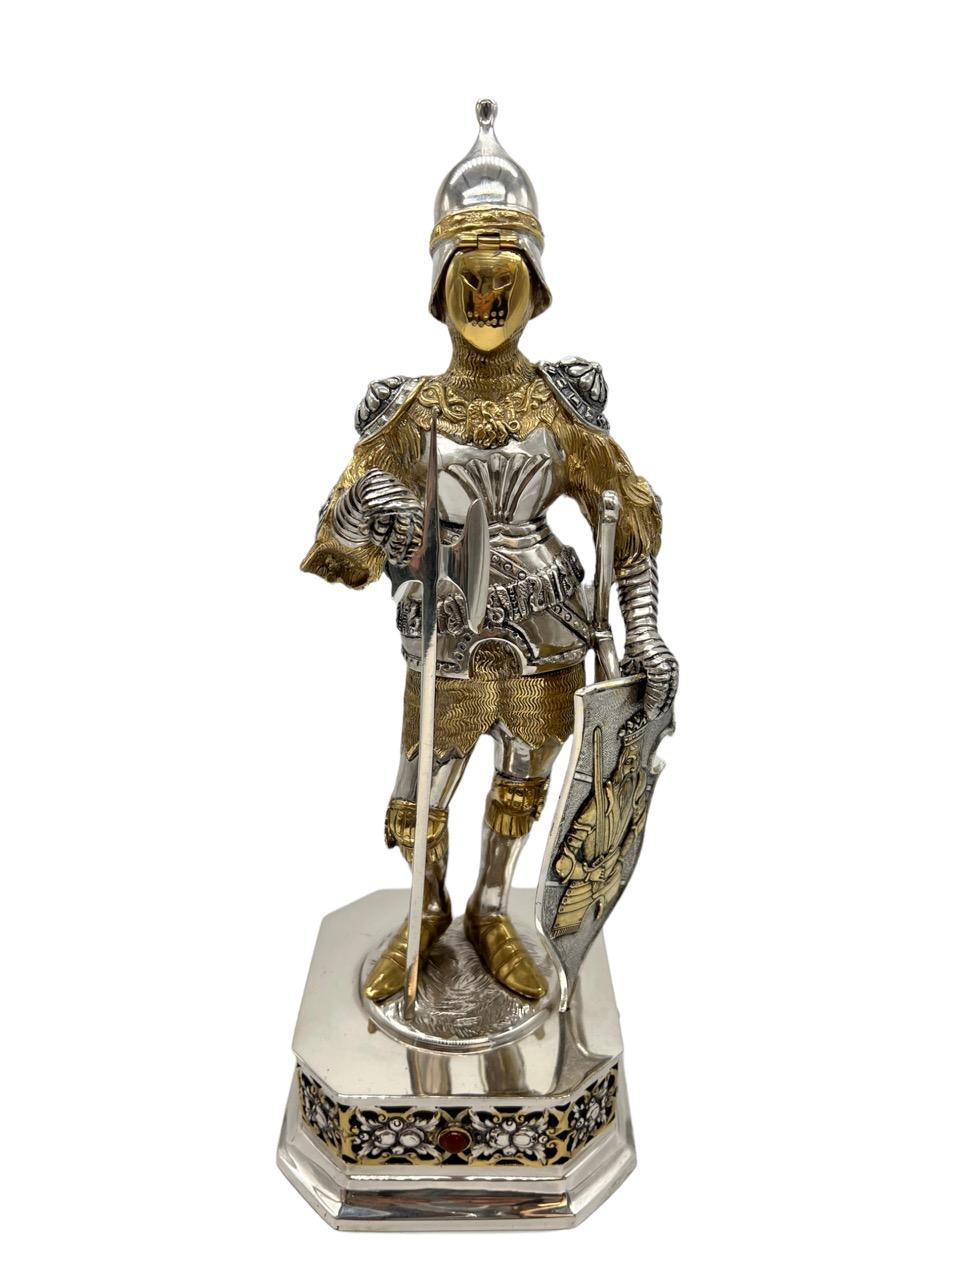 19th Century German Extremely Detailed Sterling Silver and Gold Gilt Knight In Fair Condition For Sale In North Miami, FL